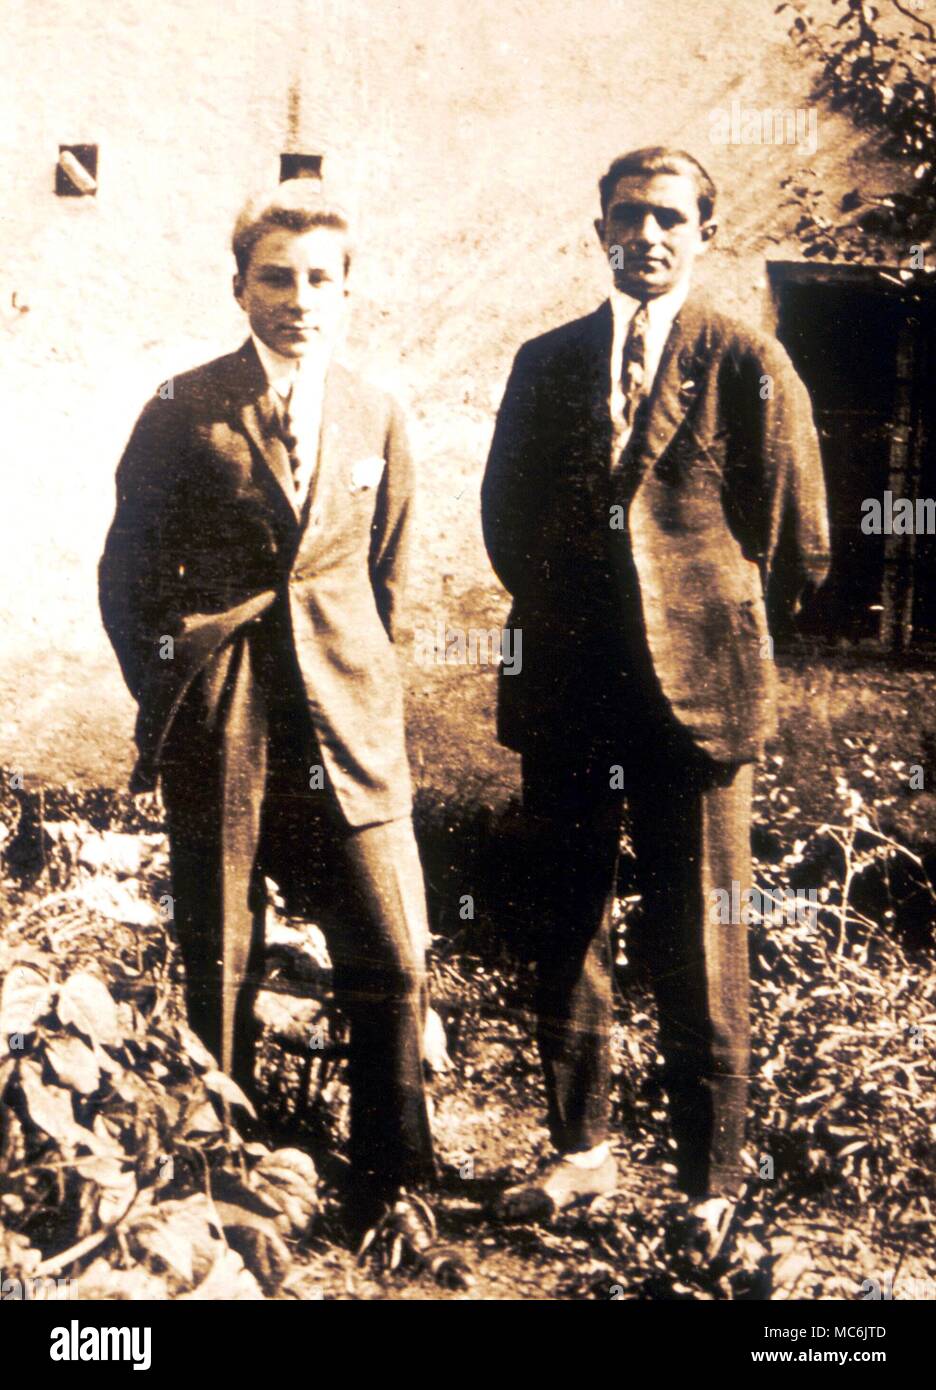 OCCULTISTS - The famous mediums Rudi Schneider (1908-1957) and his brother Willi Stock Photo